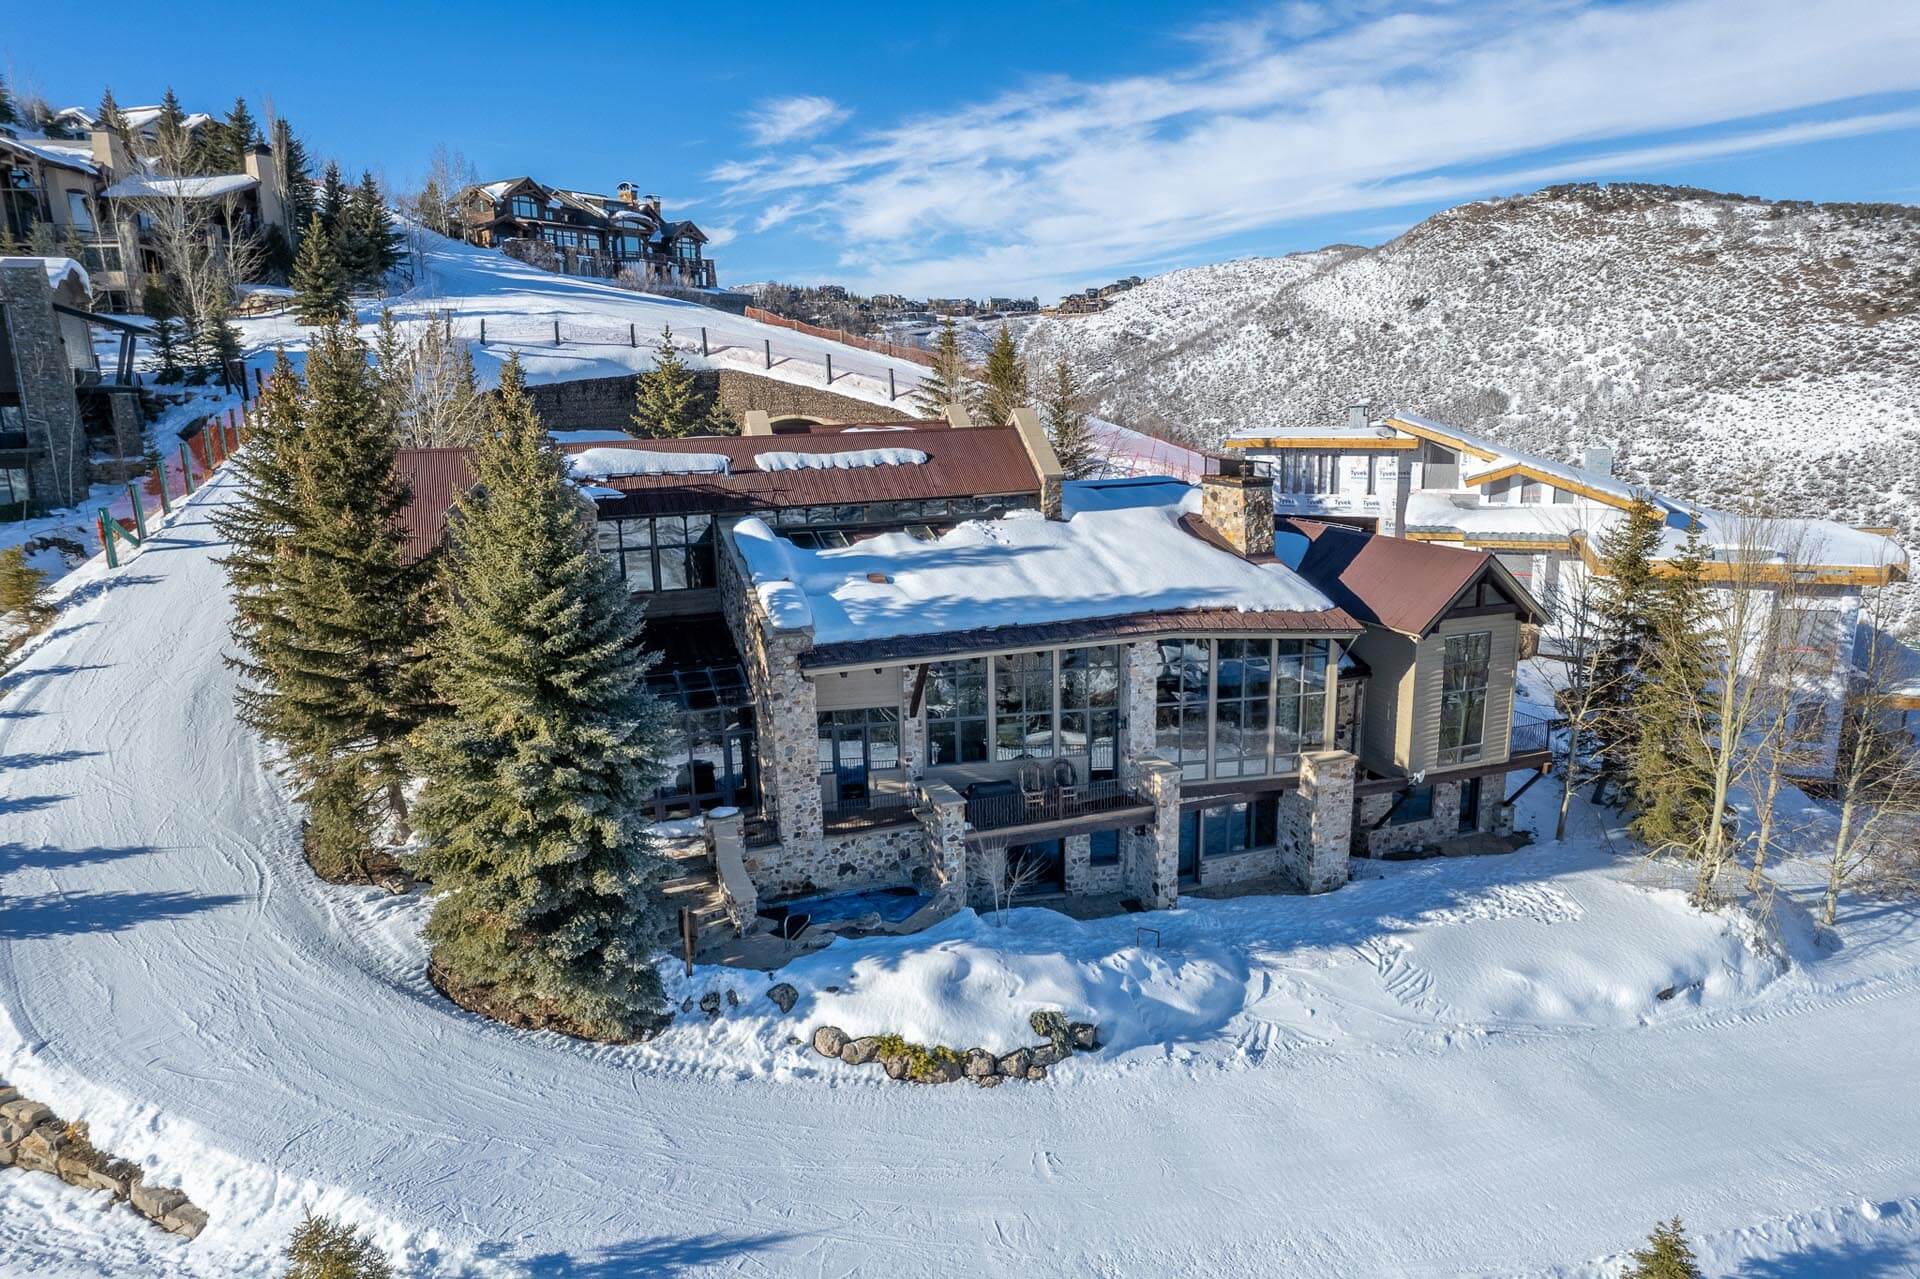 View our Park City vacation rentals